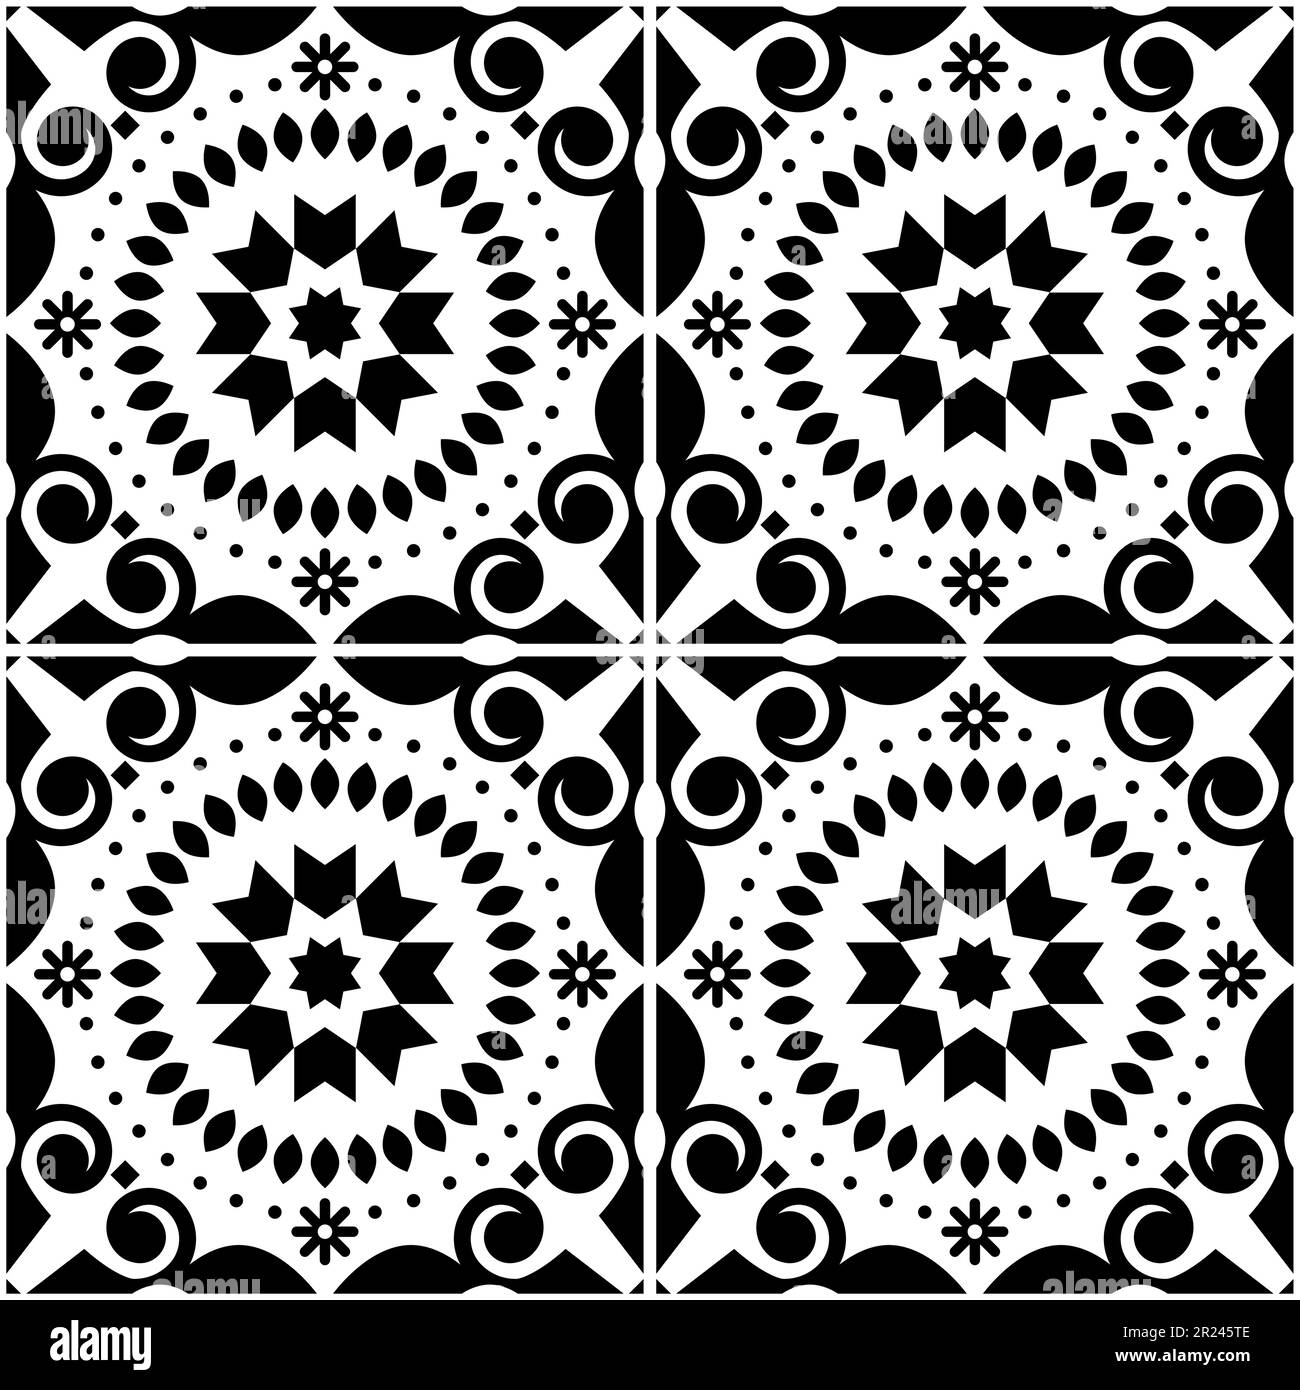 Azulejo Lisbon tile seamless vector pattern in black and white, traditional wallpaper or textile, fabric print design inpired by old tiles from Portug Stock Vector